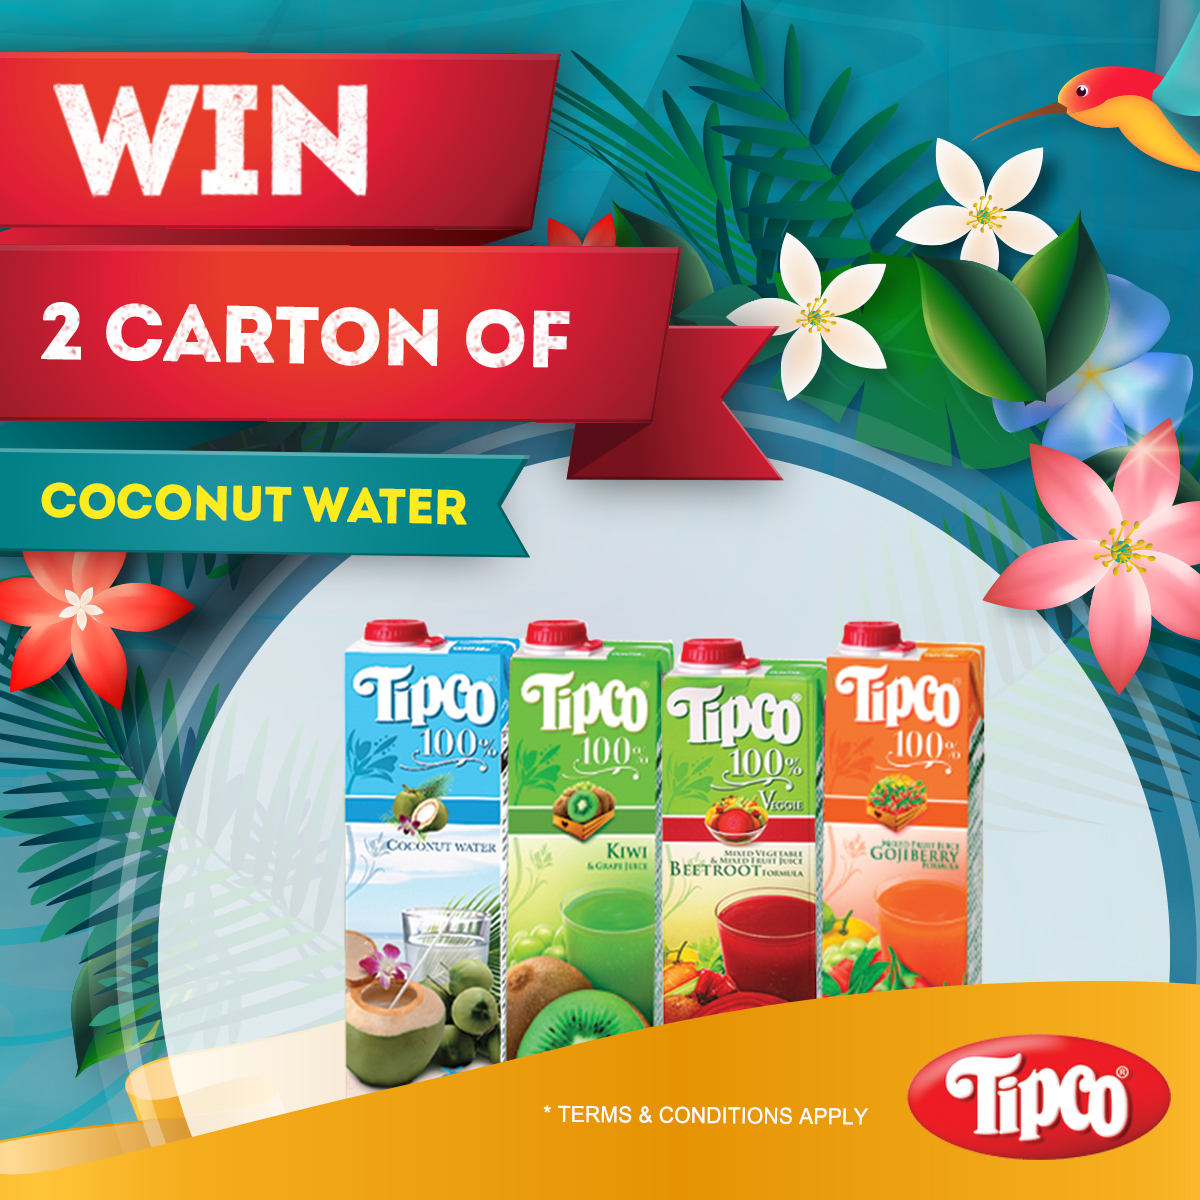 [Win!] 5 sets of 2 carton Tipco coconut water are up for grabs!